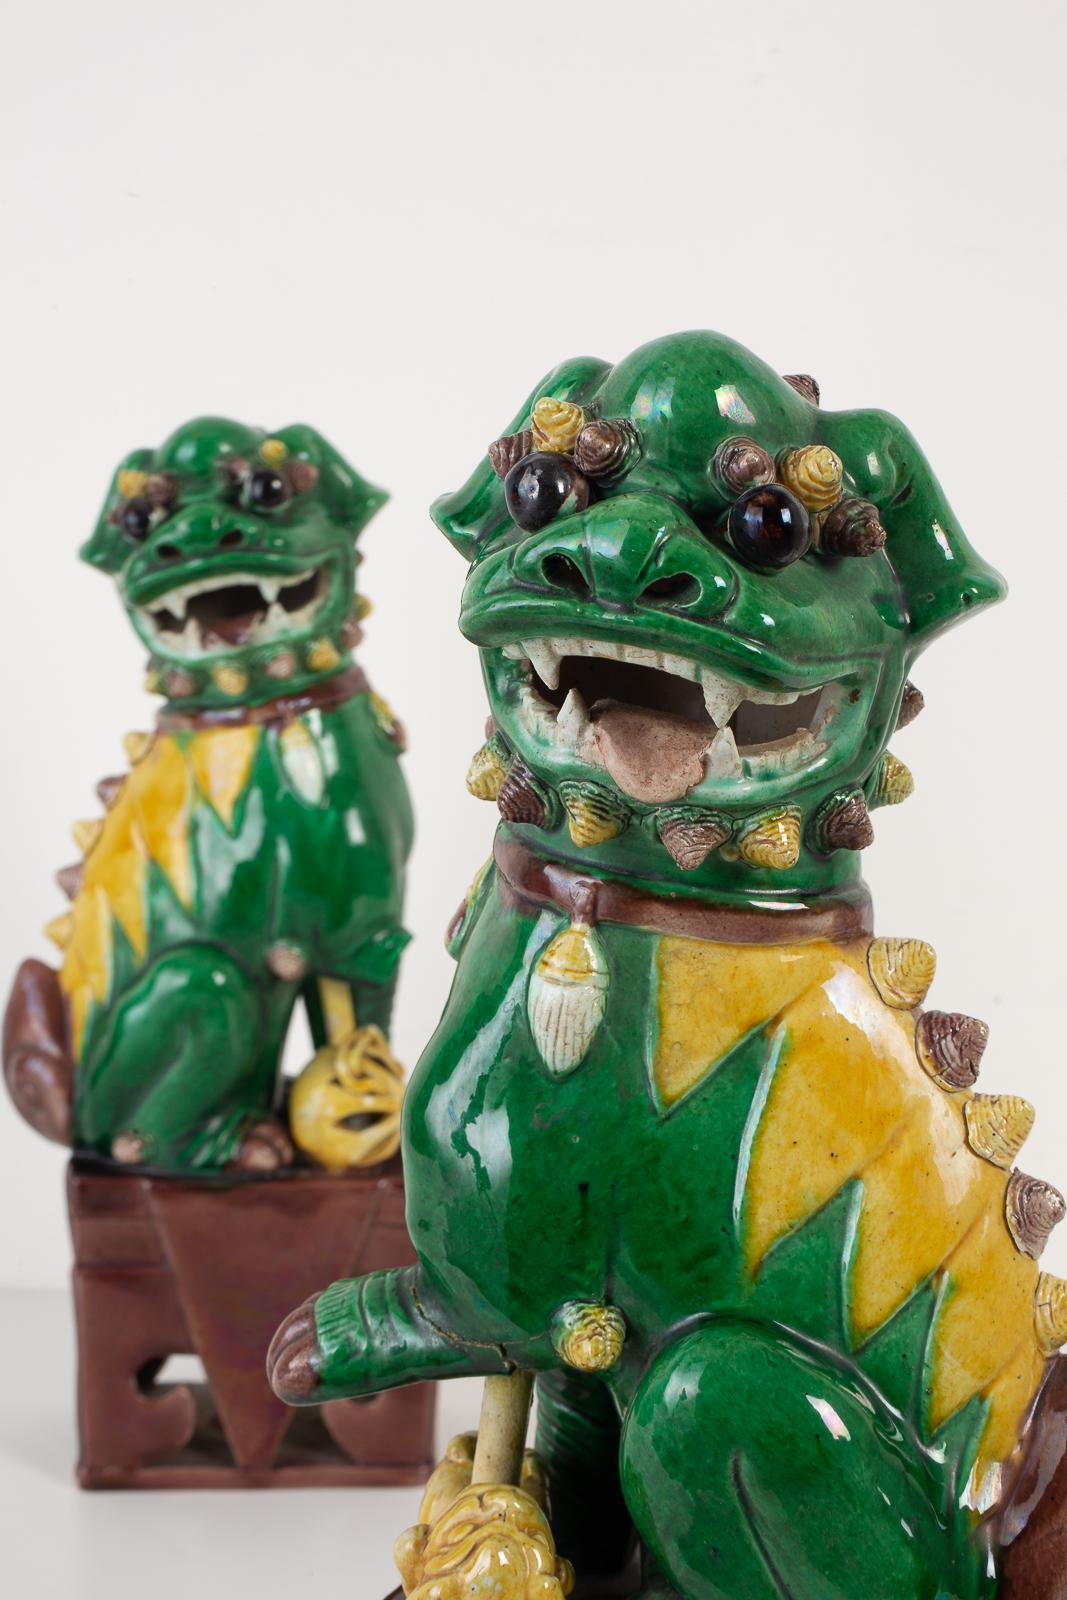 Fierce pair of ceramic Chinese Foo dogs on stands depicted sitting. Made in a beautiful famille verte green with bright yellow accents. Large size standing 14 inches high. One has a ball, and one has a cub under its arm. One has a damaged arm and